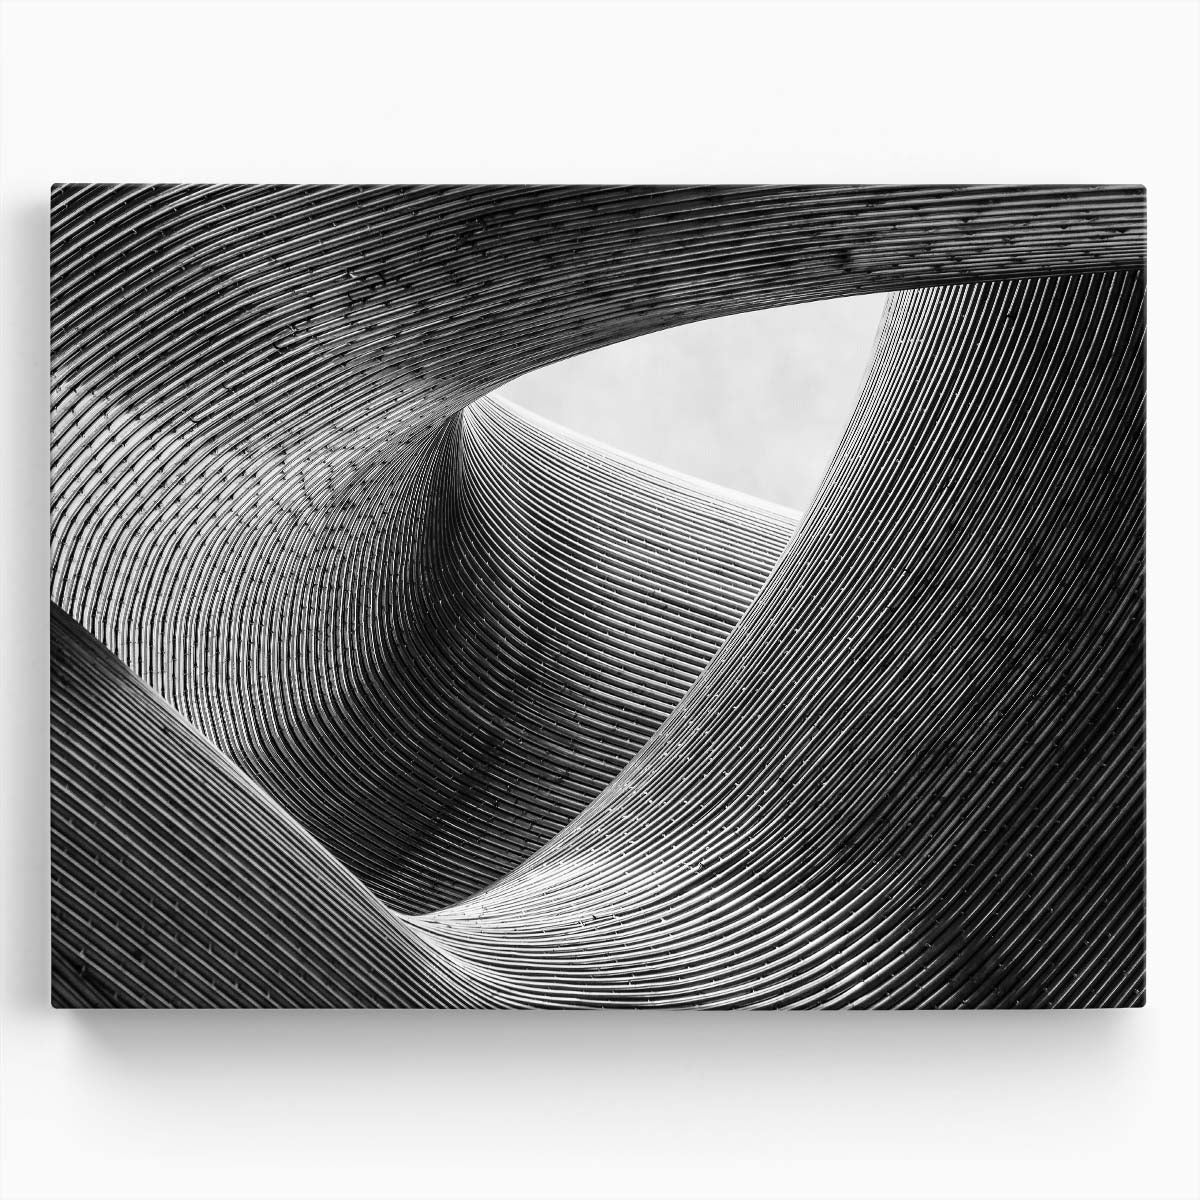 Monochrome Metal Curves Abstract Sculpture Wall Art by Luxuriance Designs. Made in USA.